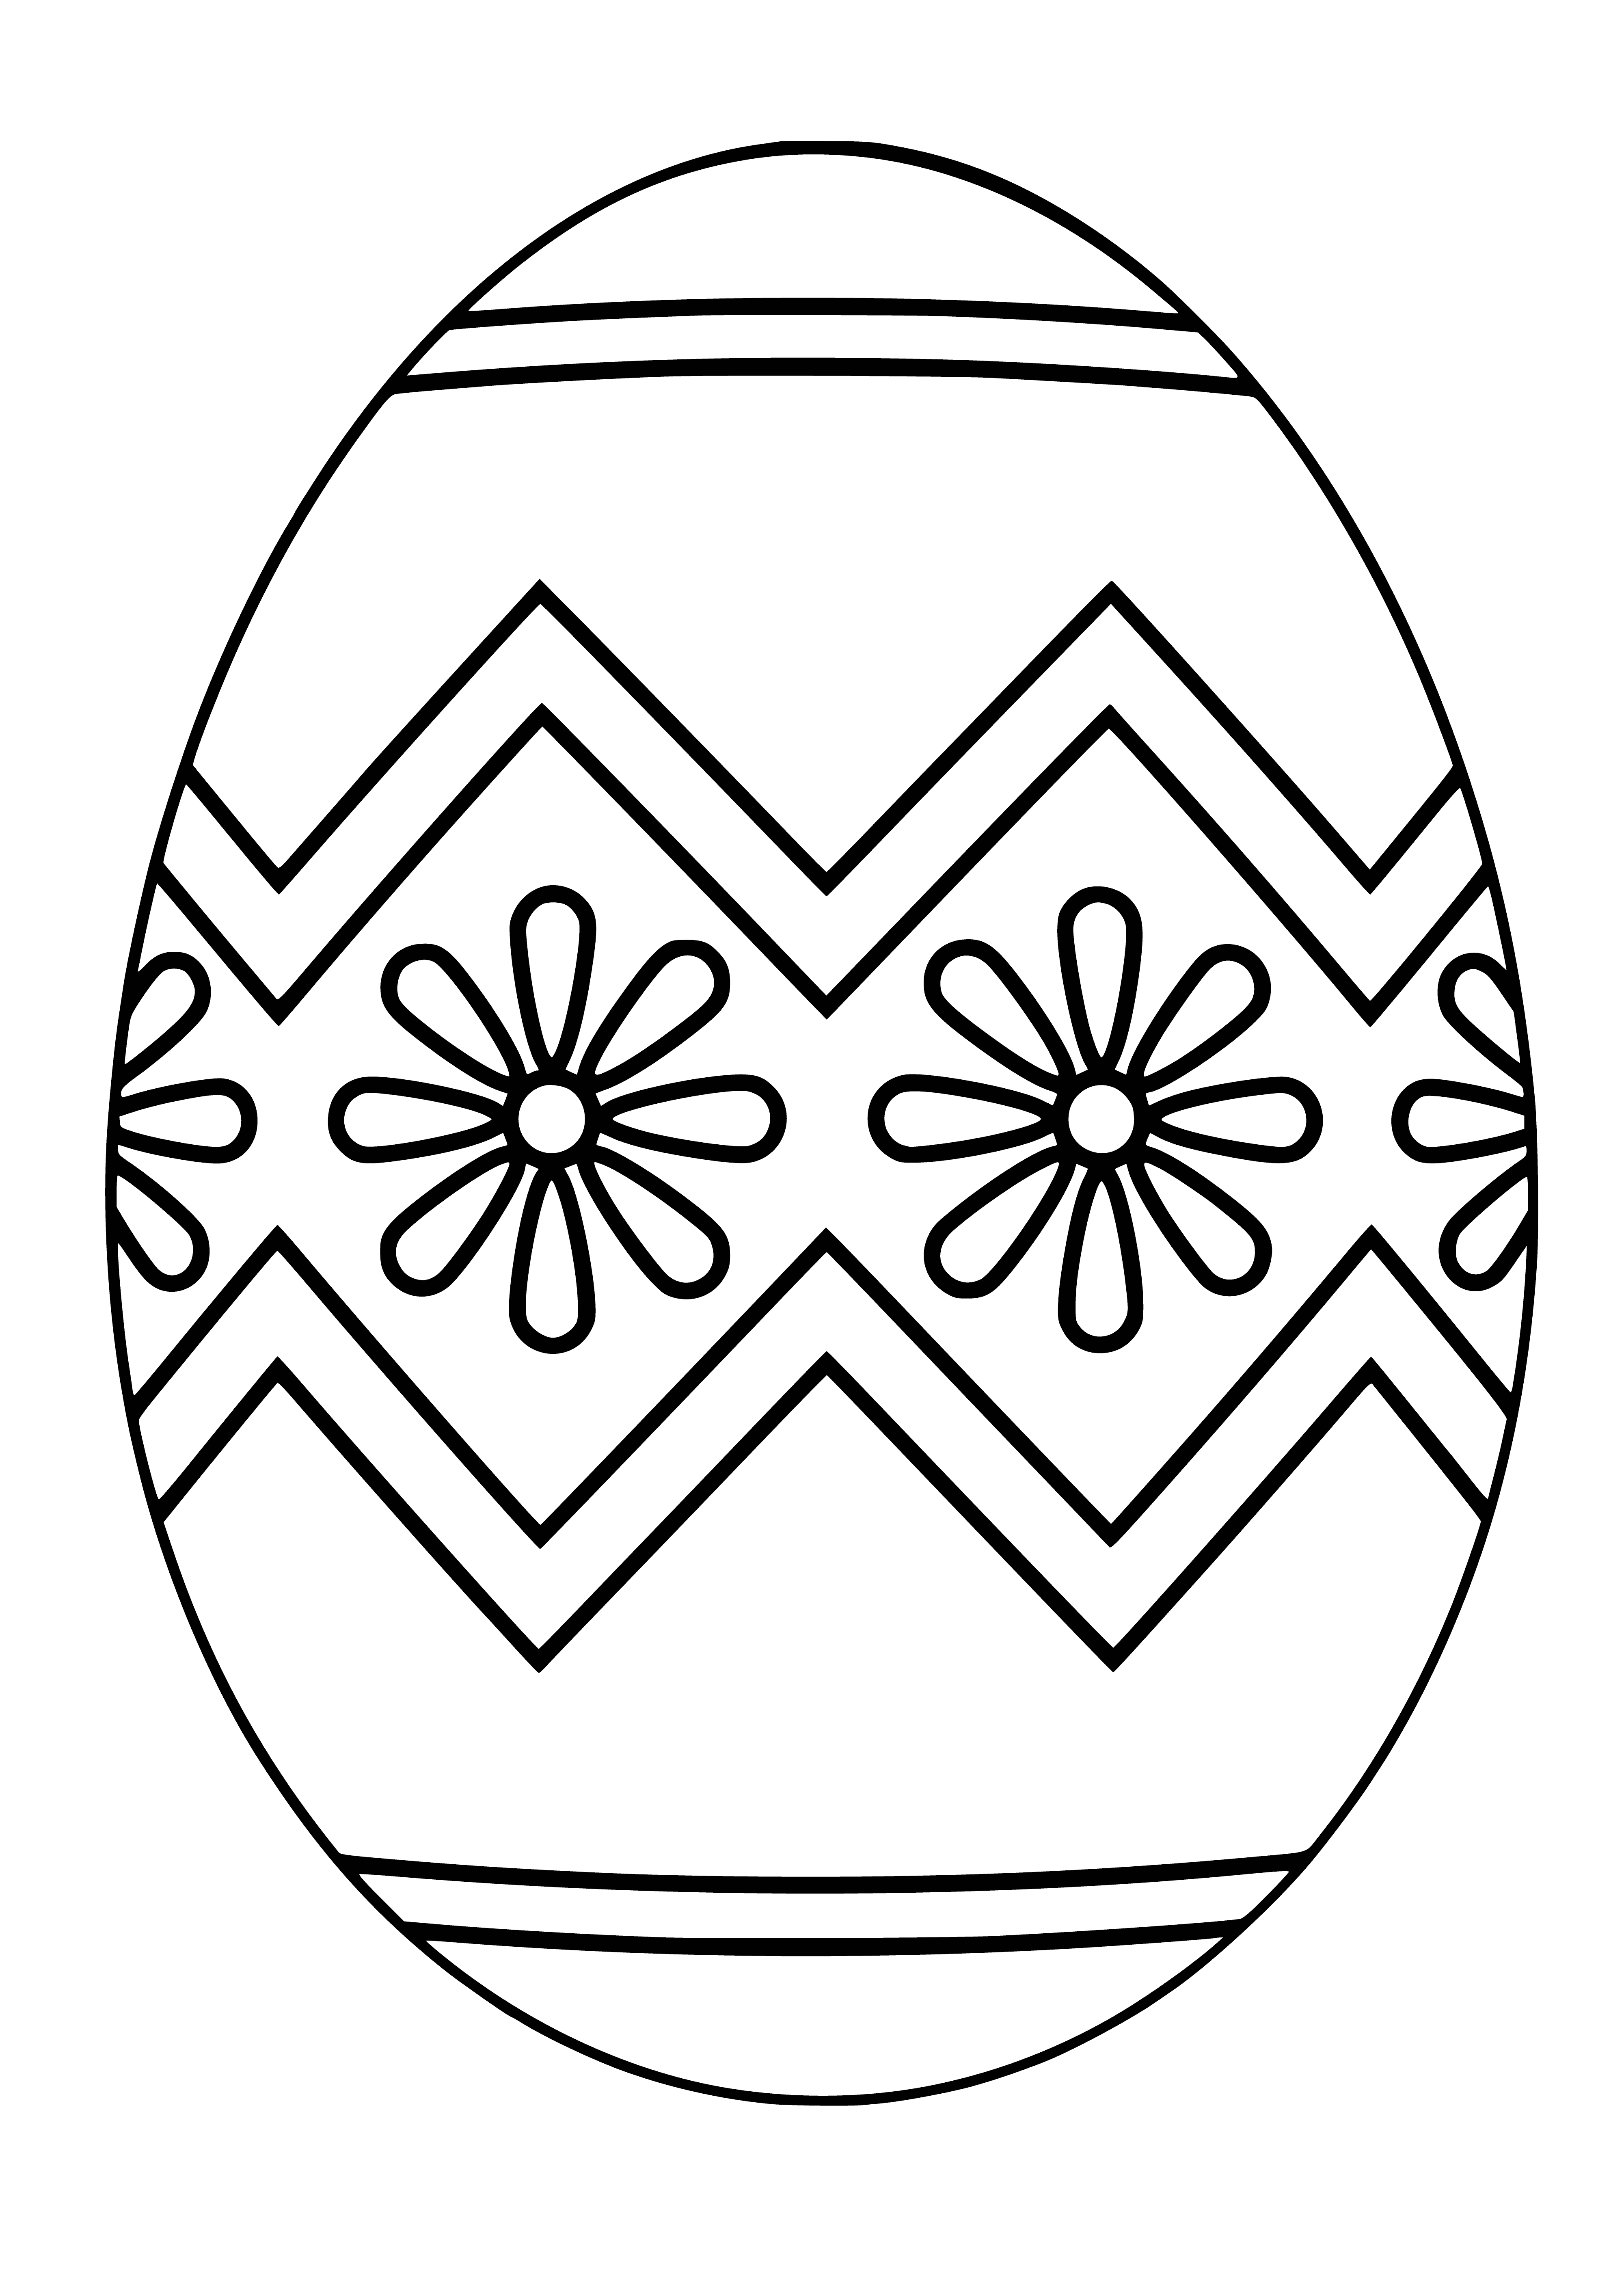 coloring page: 140 characters: Easter eggs are brightly-colored eggs given as gifts to celebrate Easter.